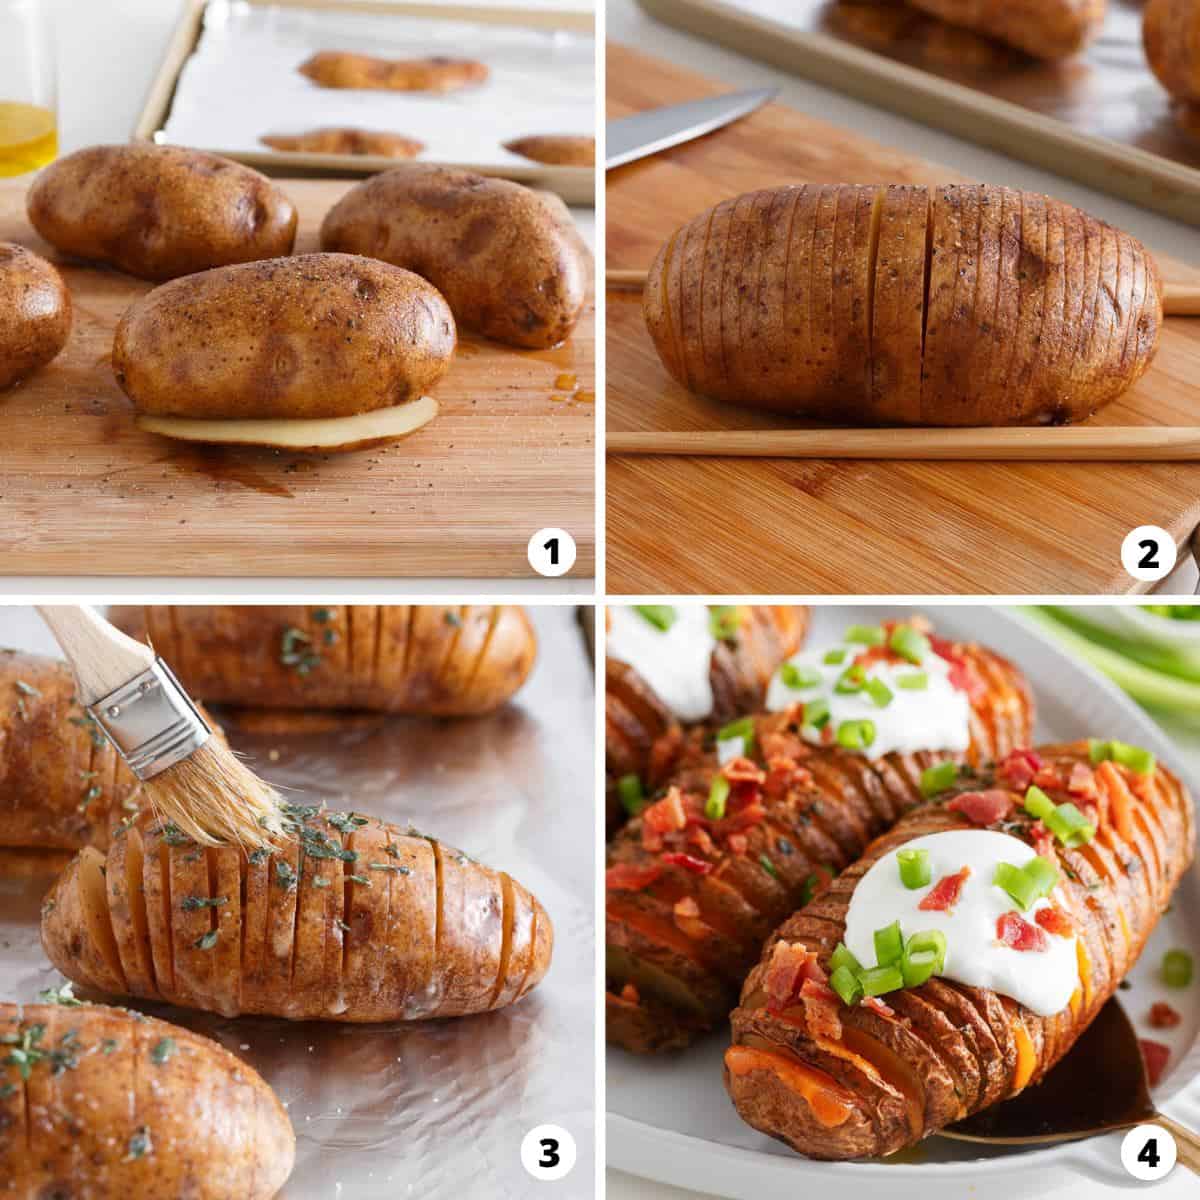 Showing how to make hasselback potatoes in a 4 step collage.